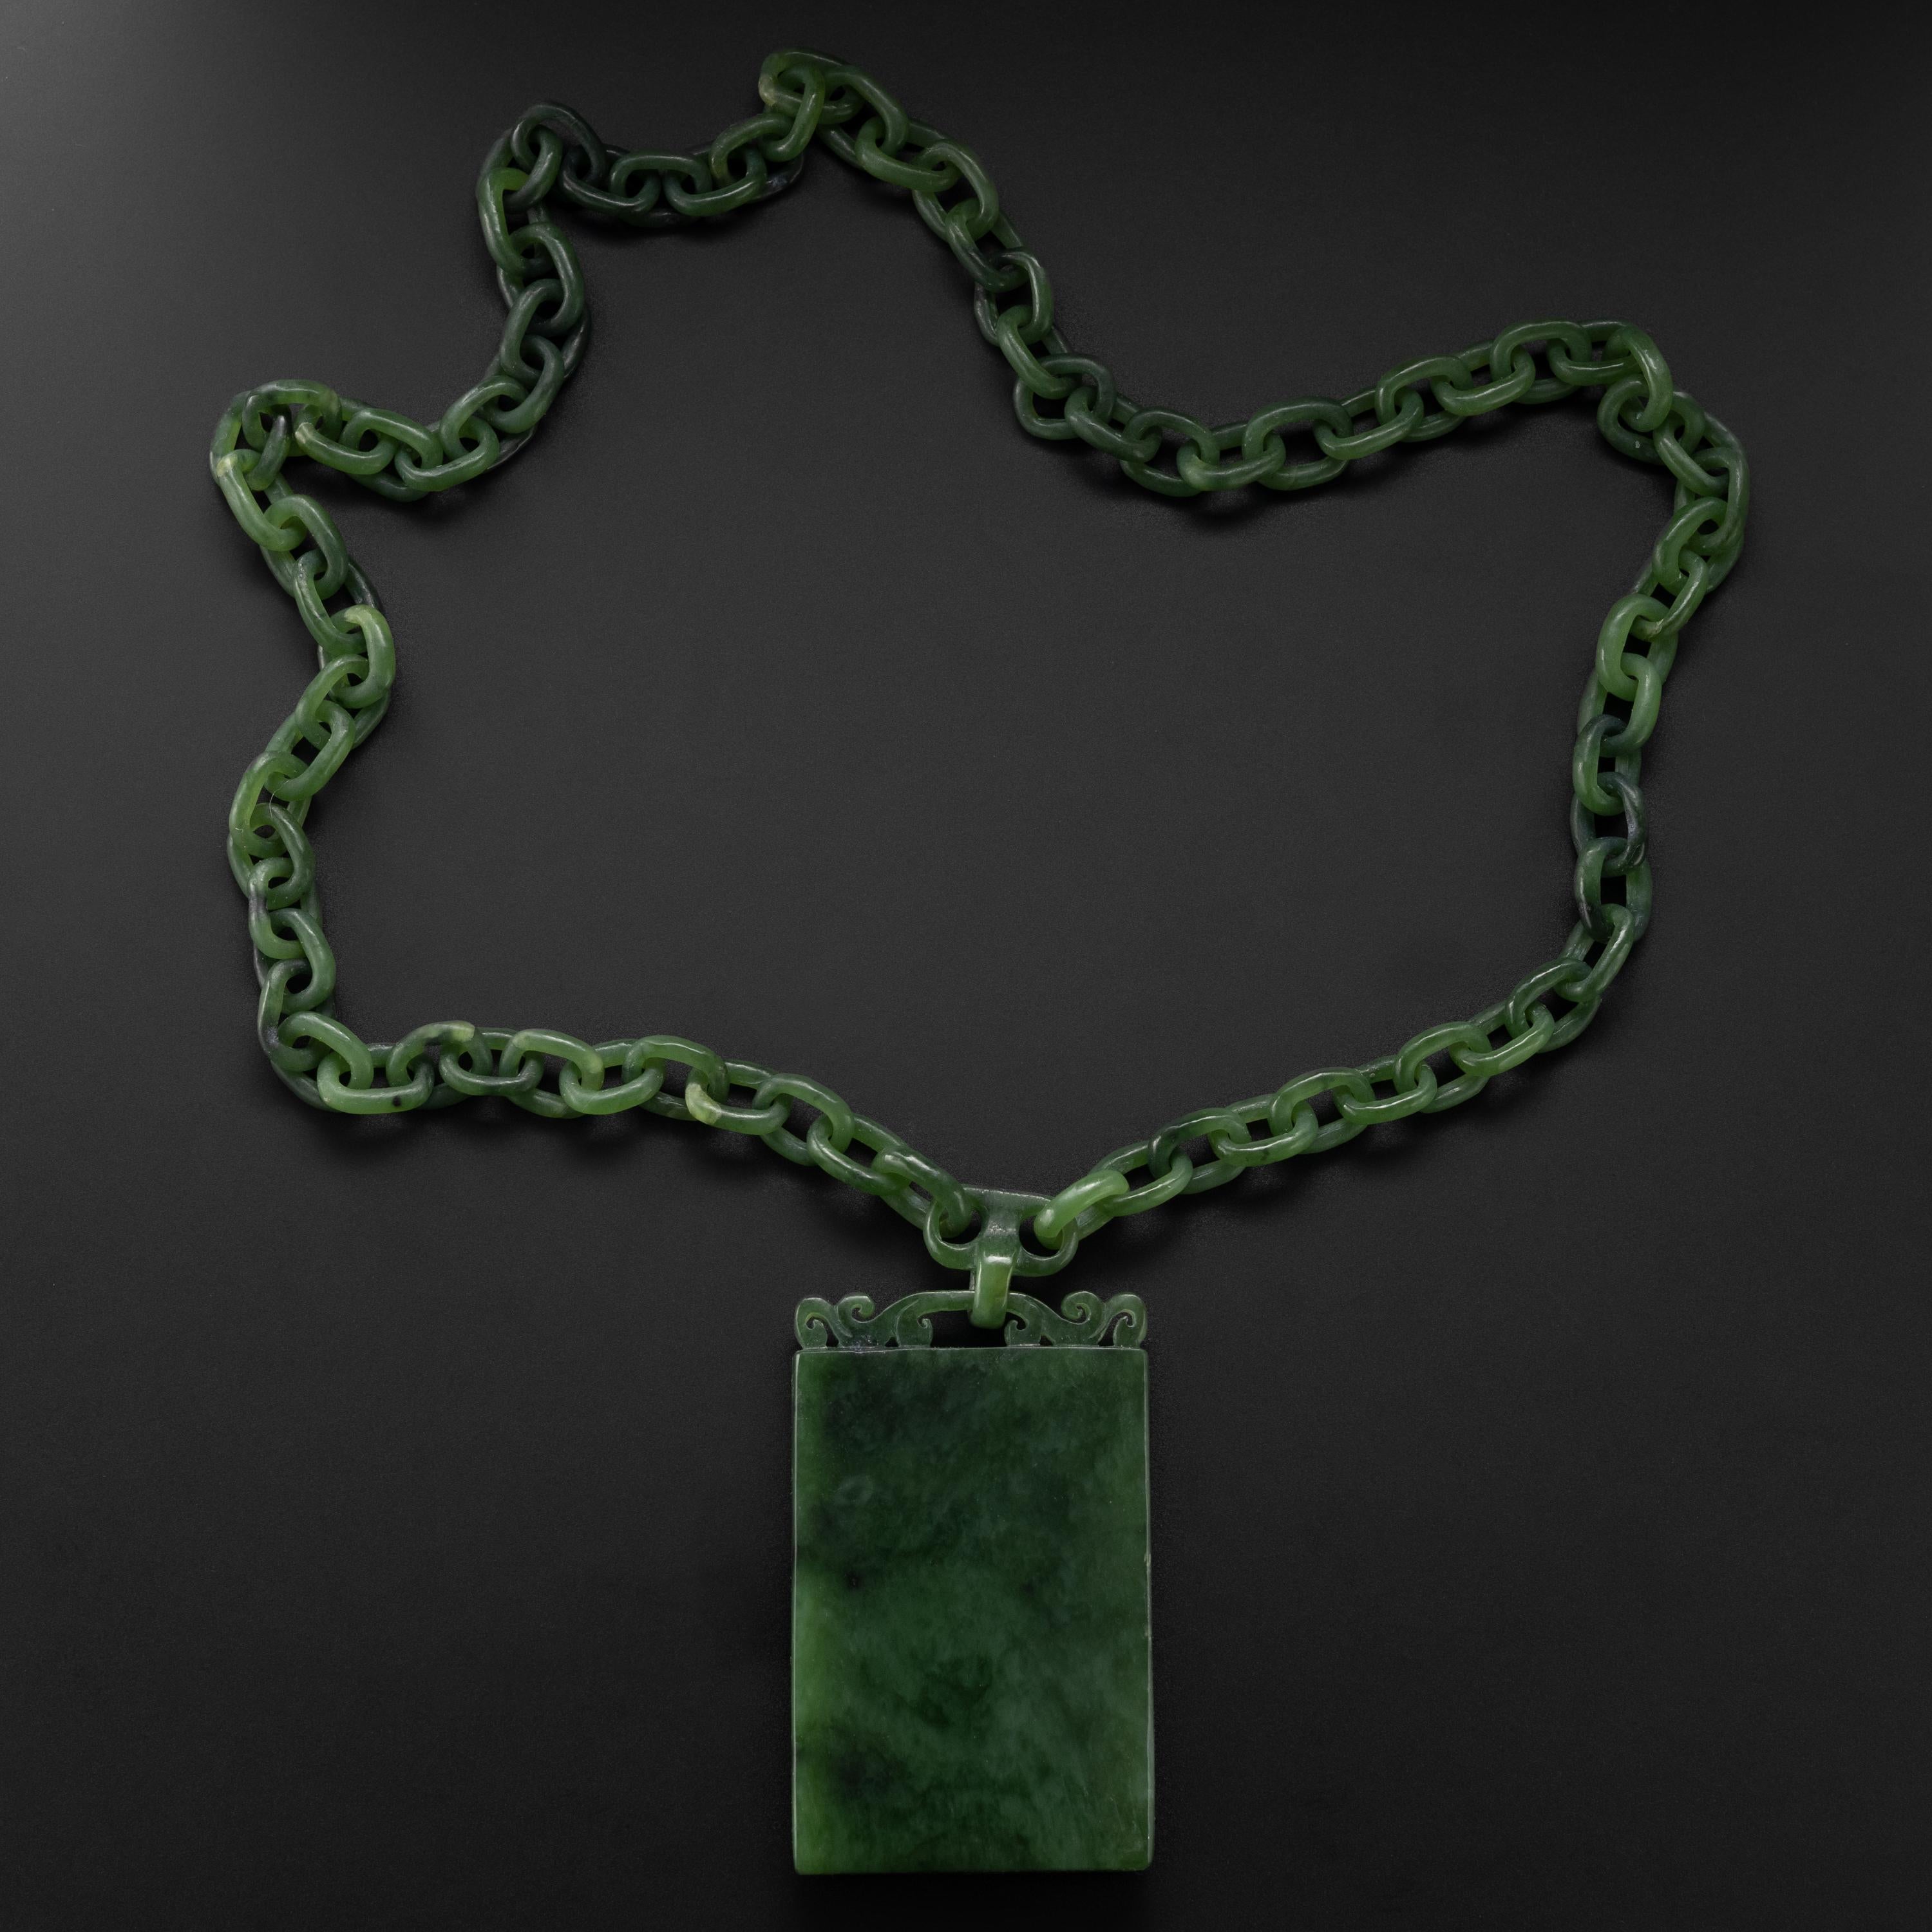 This is an utterly magnificent and unique necklace entirely hand-carved by a Chinese lapidary artist. The two carved chains meet on the carved bail of the pine-green nephrite jade plaque, highly polished on both sides. This is a spectacular and